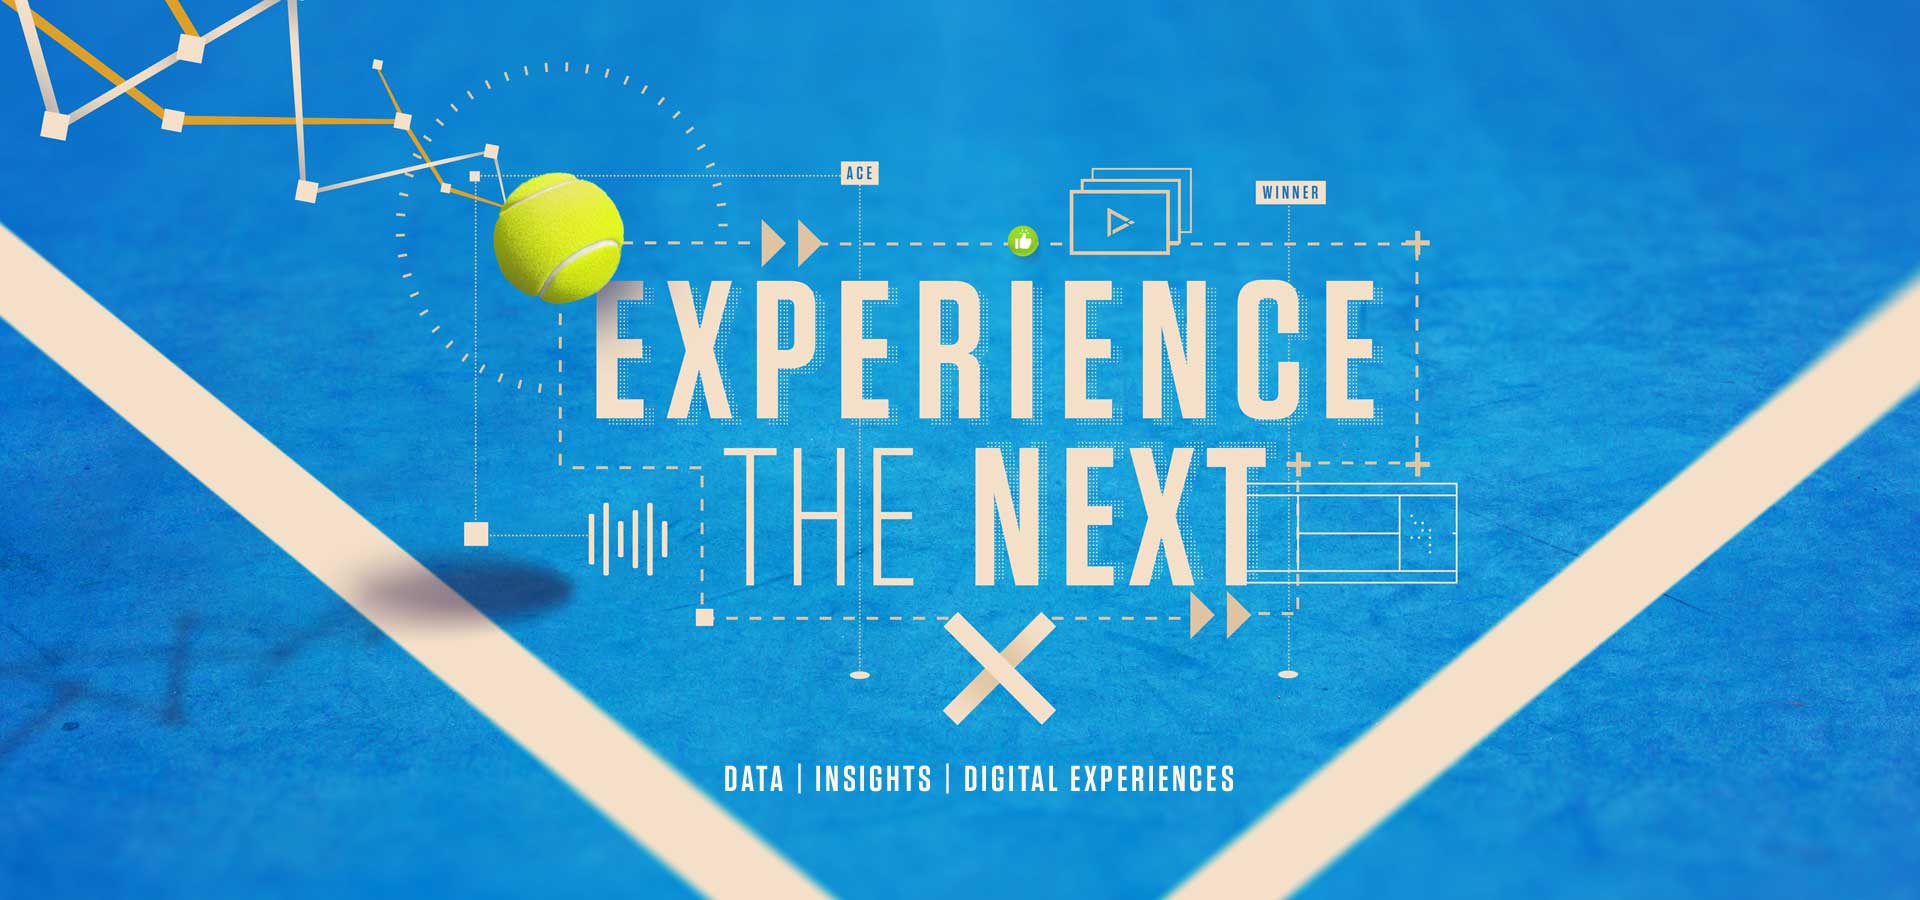 EXPERIENCE THE NEXT